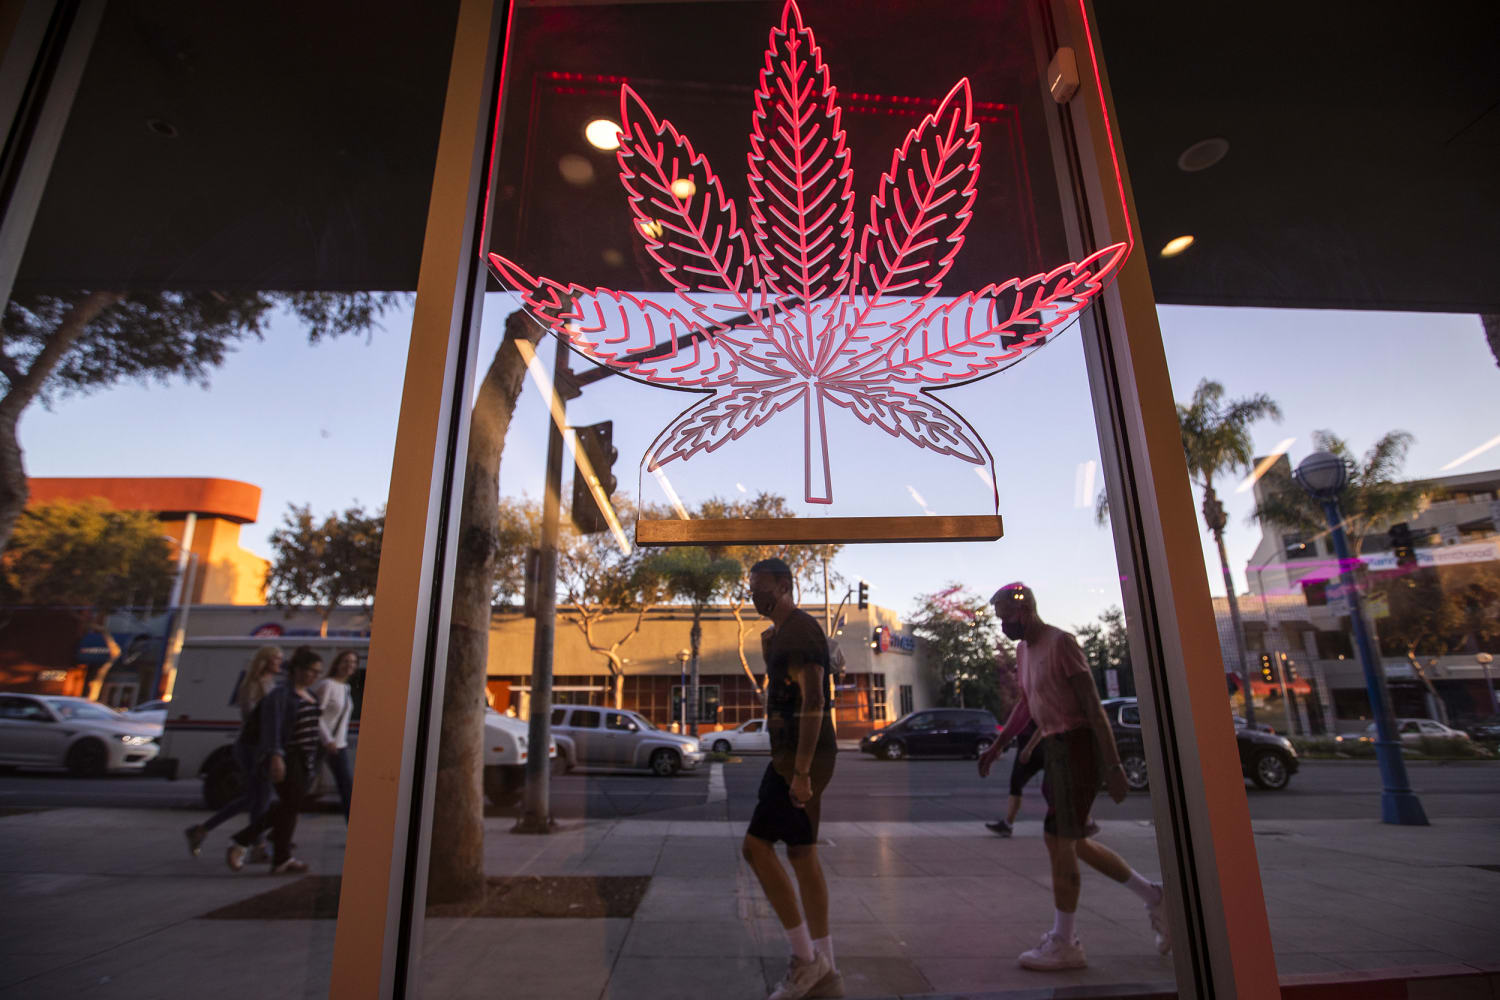 ‘On the brink of collapse,’ California pot businesses call for tax overhaul